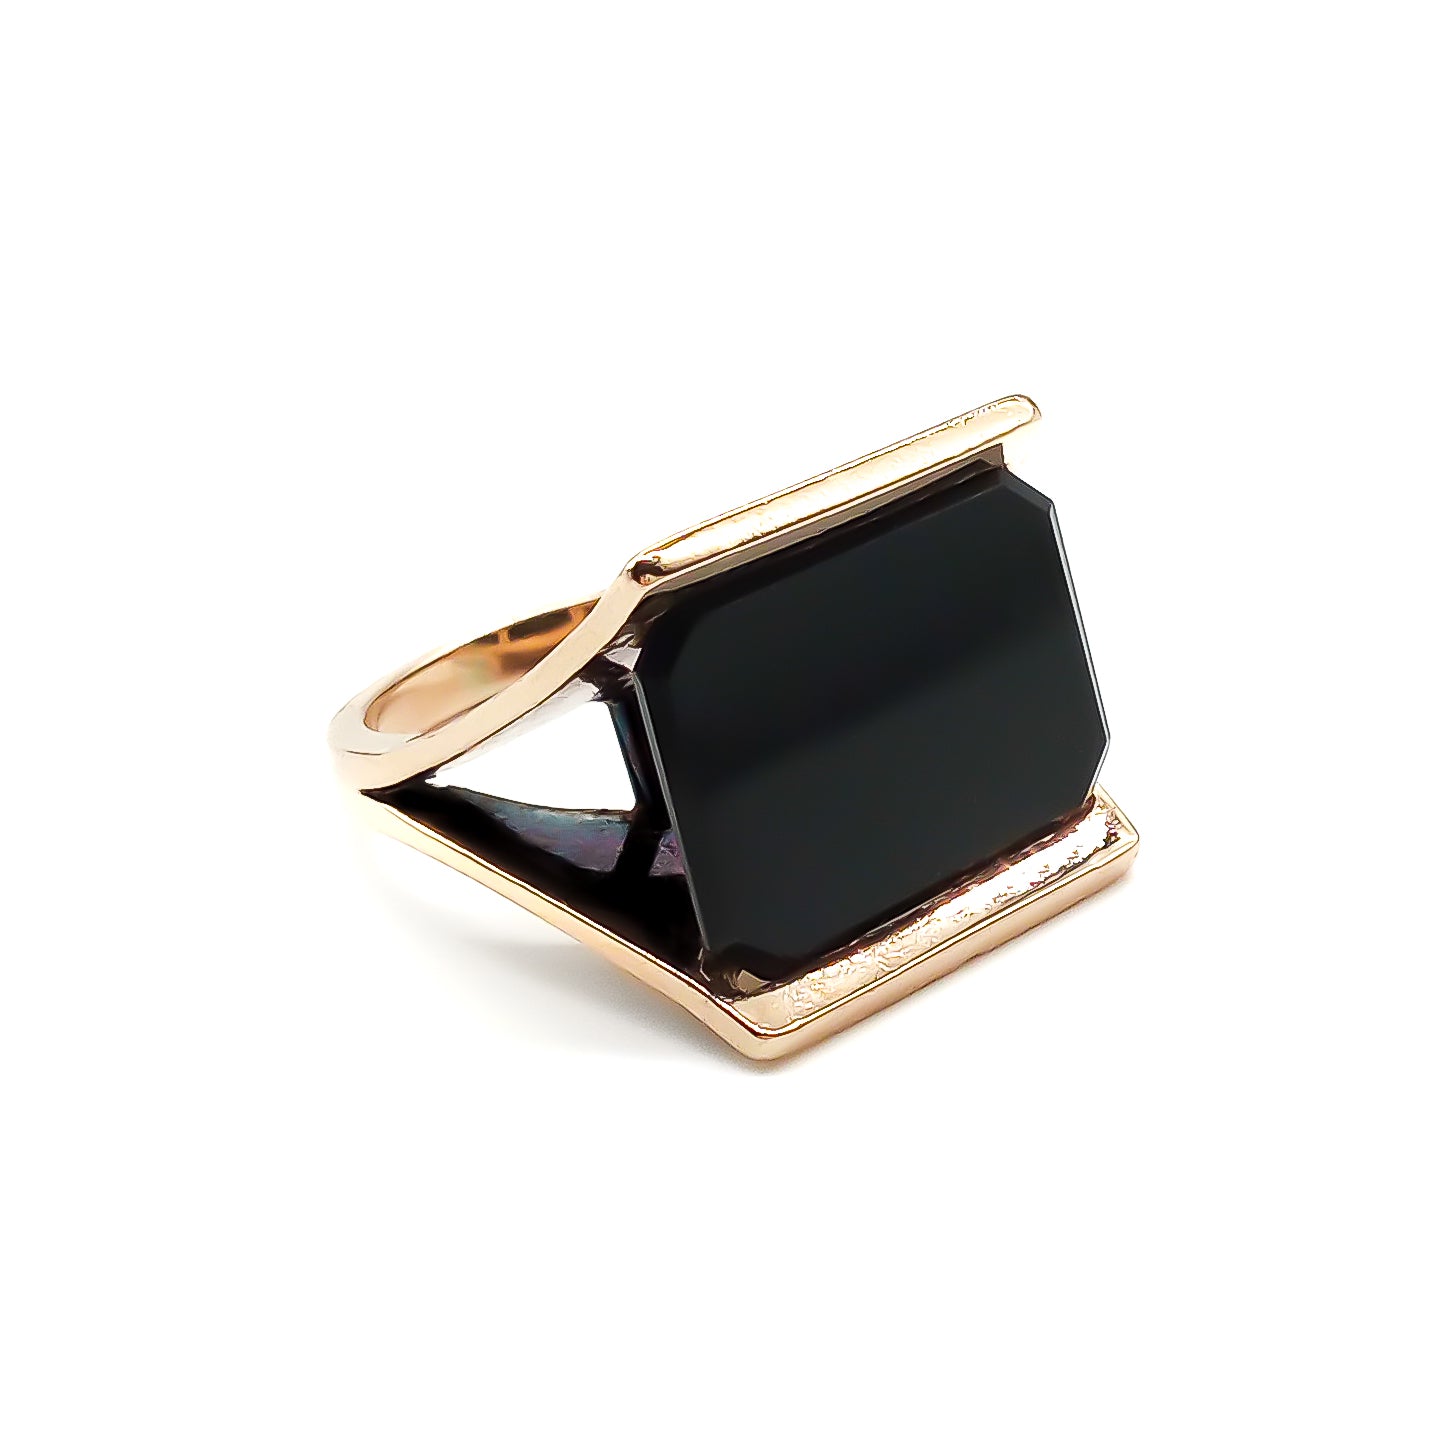 Beautifully engraved rose gold ring set with a rectangular onyx disc. Circa 1950’s